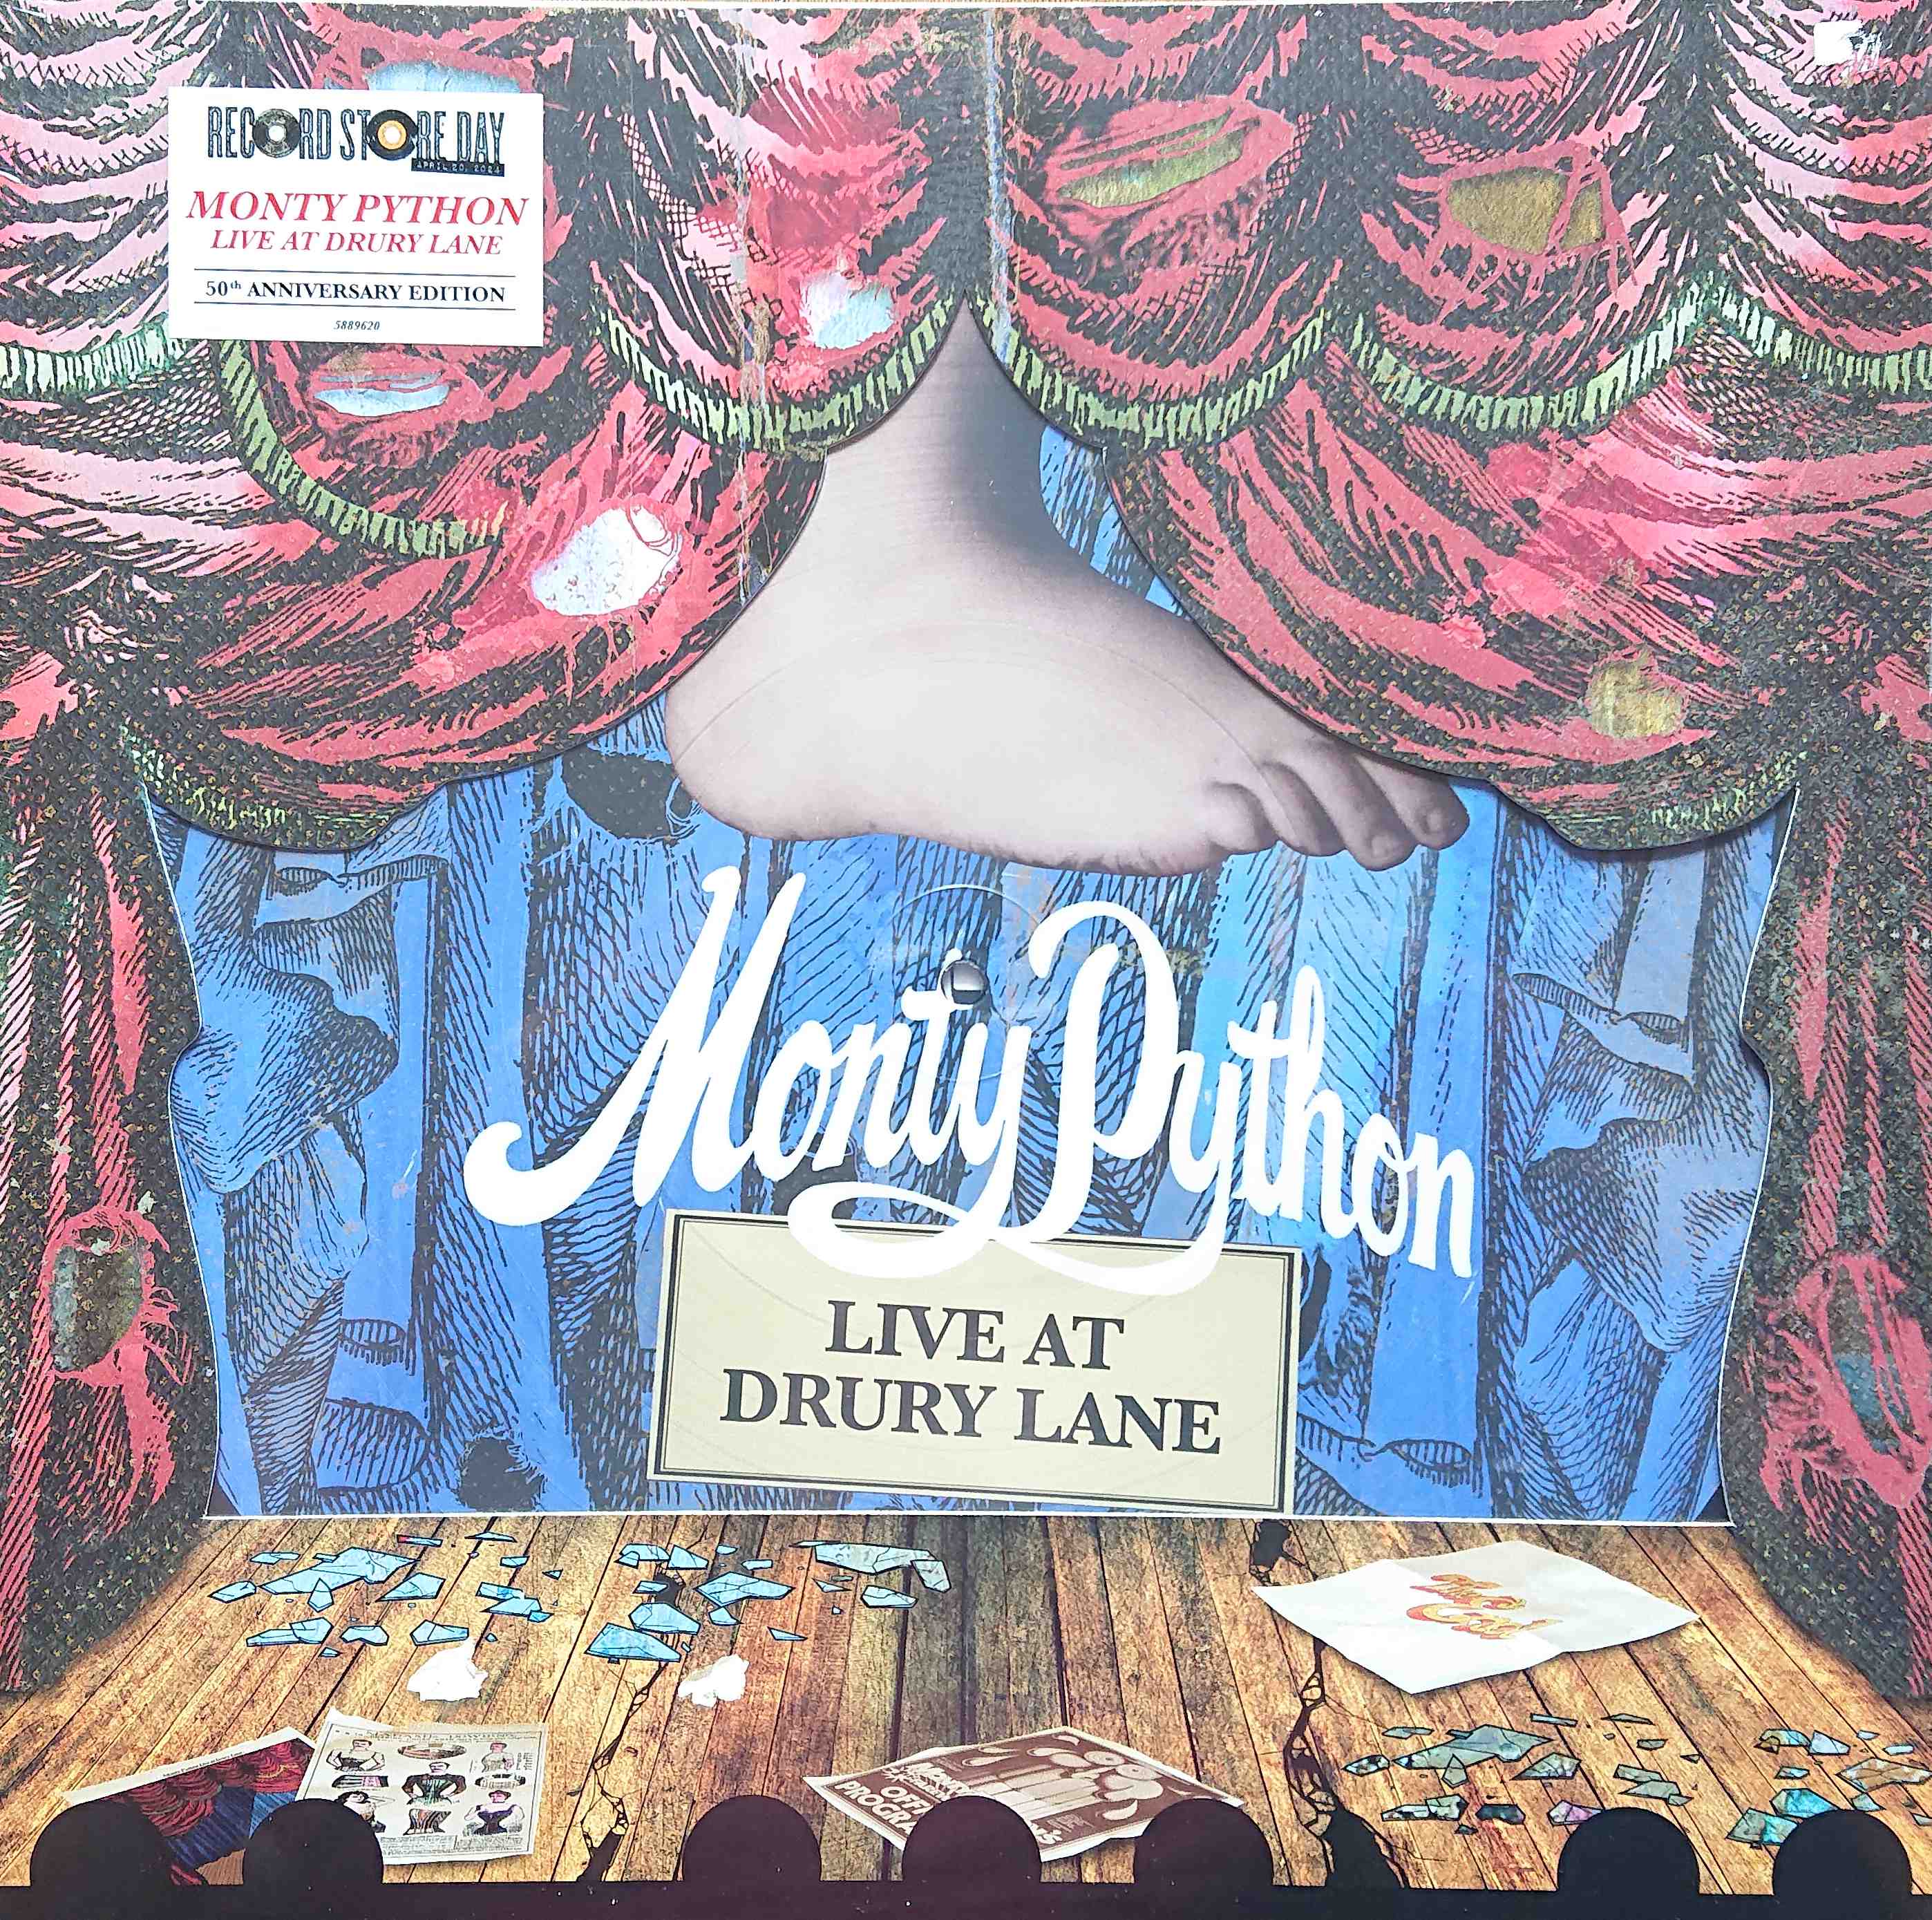 Picture of Live at Drury Lane - Record Store Day 2024 by artist Graham Chapman / John Cleese / Terry Gilliam / Eric Idle / Terry Jones / Michael Palin / Monty Pythom from the BBC albums - Records and Tapes library